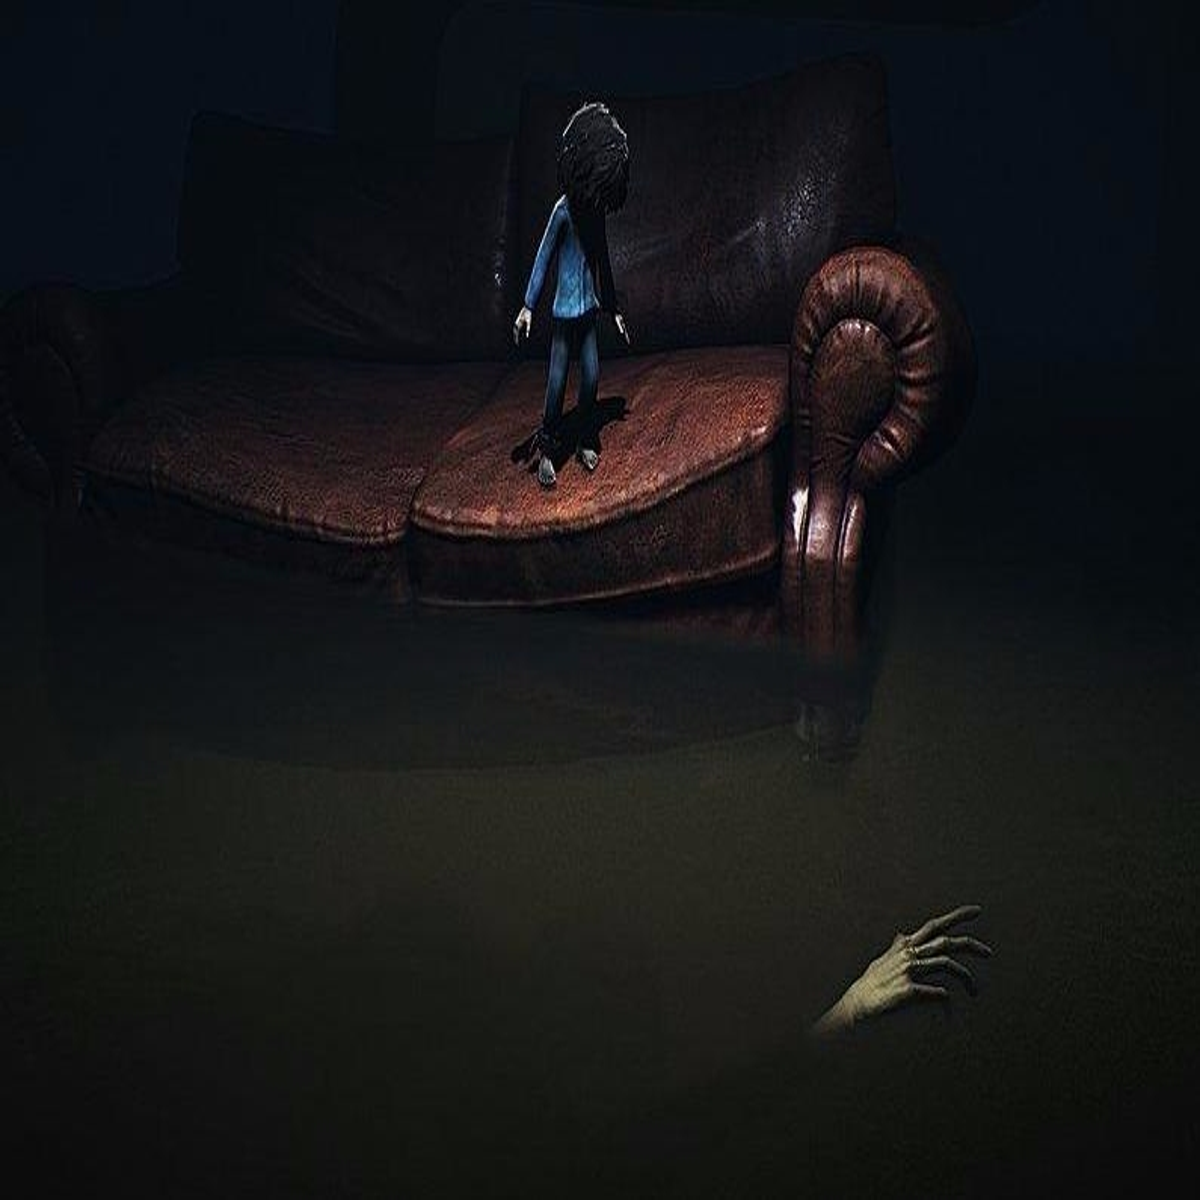 Little Nightmares Will Let Players Uncover Its Darkest Secrets In New DLC